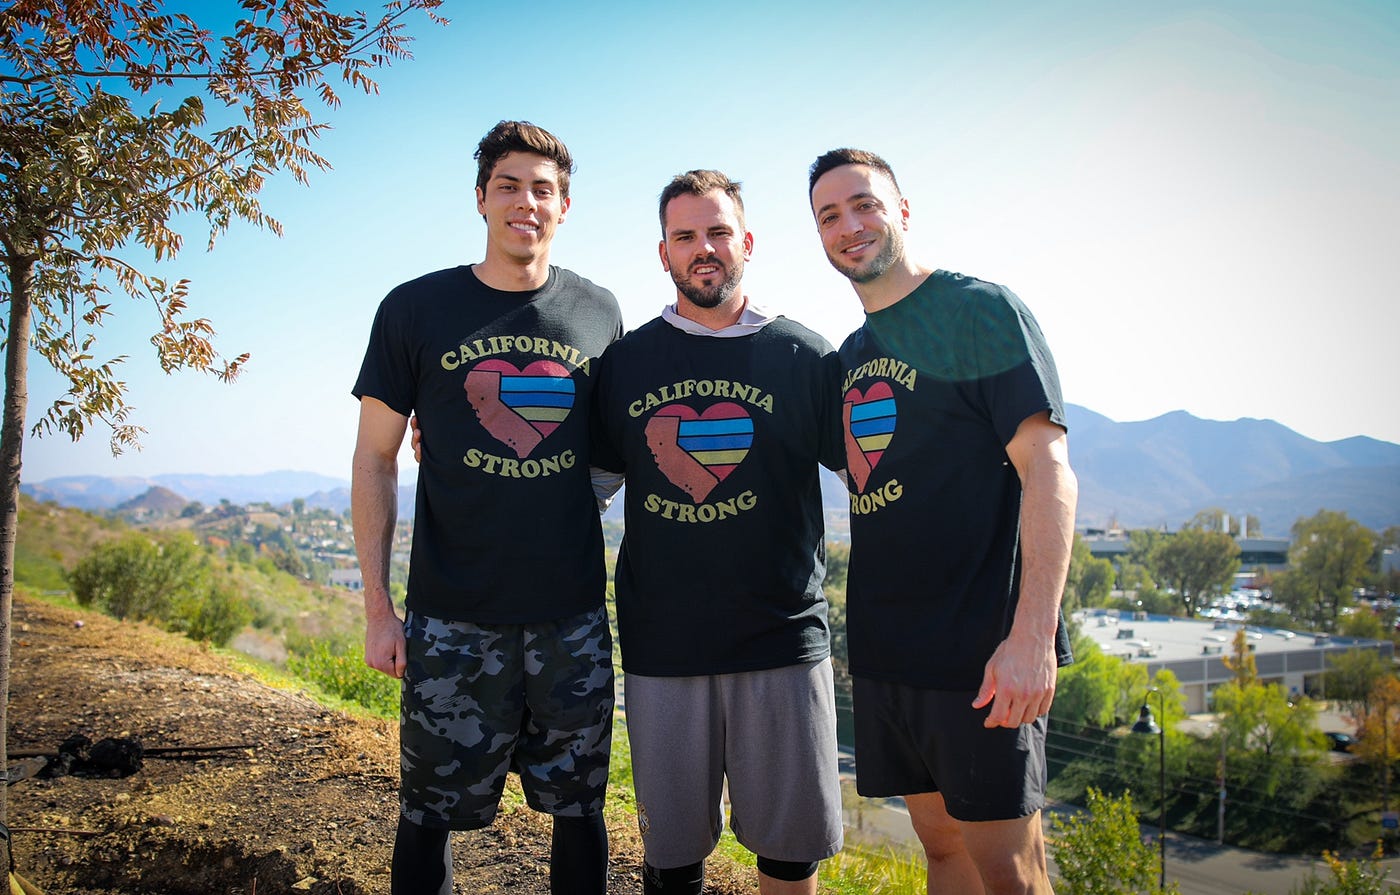 BRAUN, YELICH, MOUSTAKAS, ATTANASIO FAMILY JOIN FORCES FOR “CALIFORNIA  STRONG”, by Caitlin Moyer